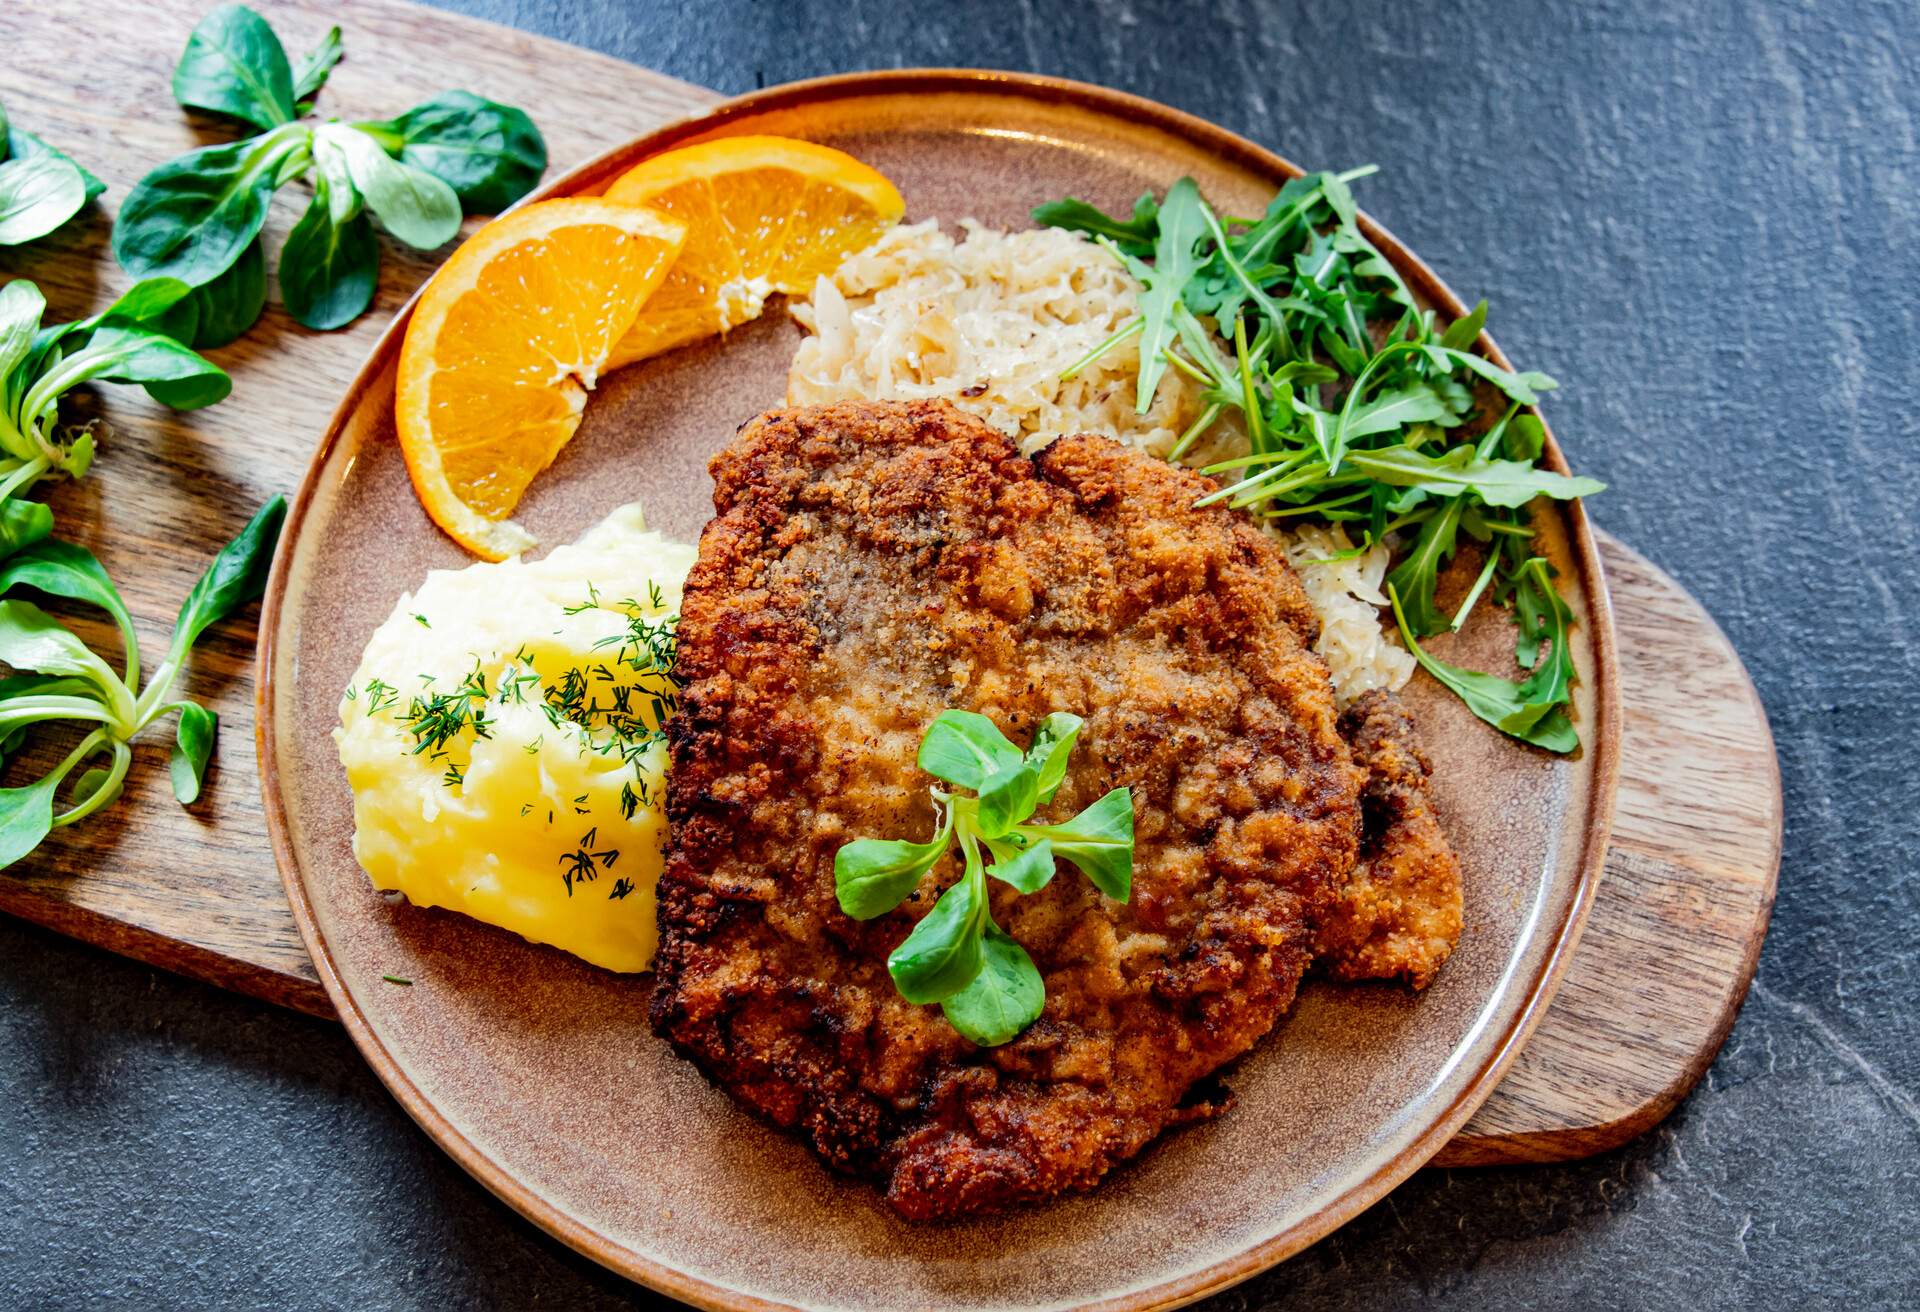 Pork breaded cutlet coated with breadcrumbs with mashed potatoes and cabbage